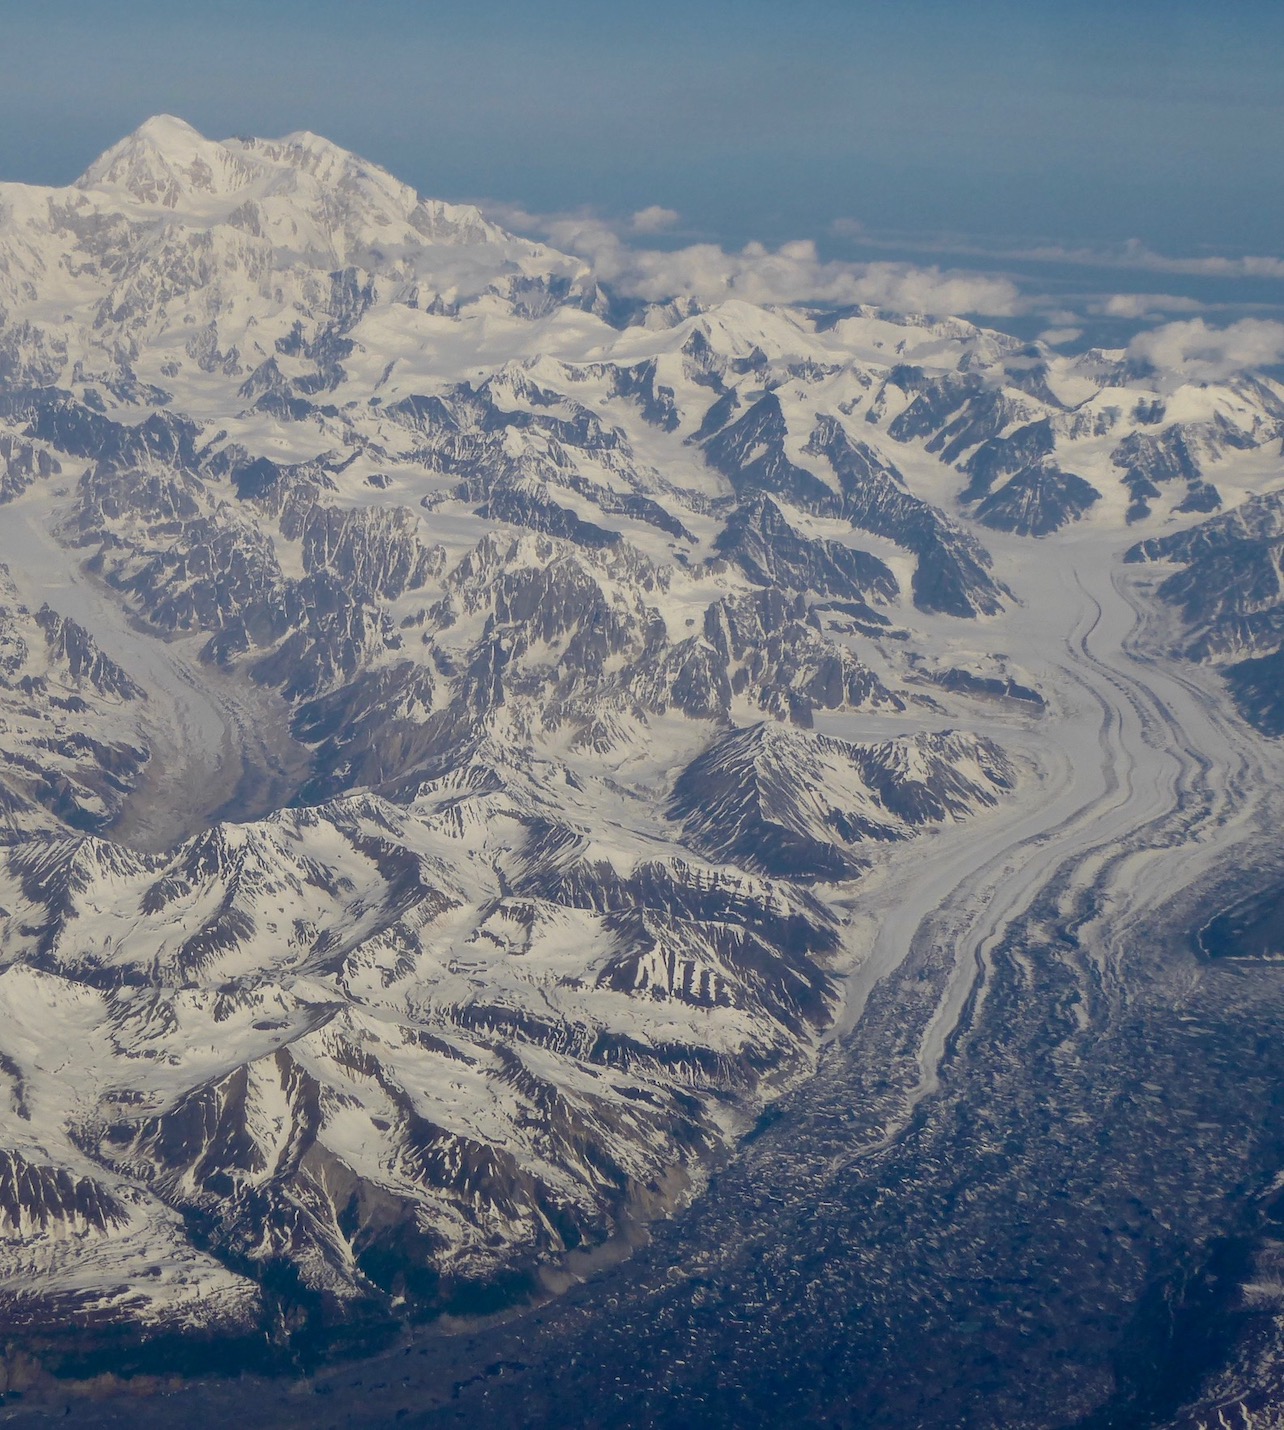 A large snow-covered mountain rises above lower peaks and glaciers in the foreground in an aerial view.